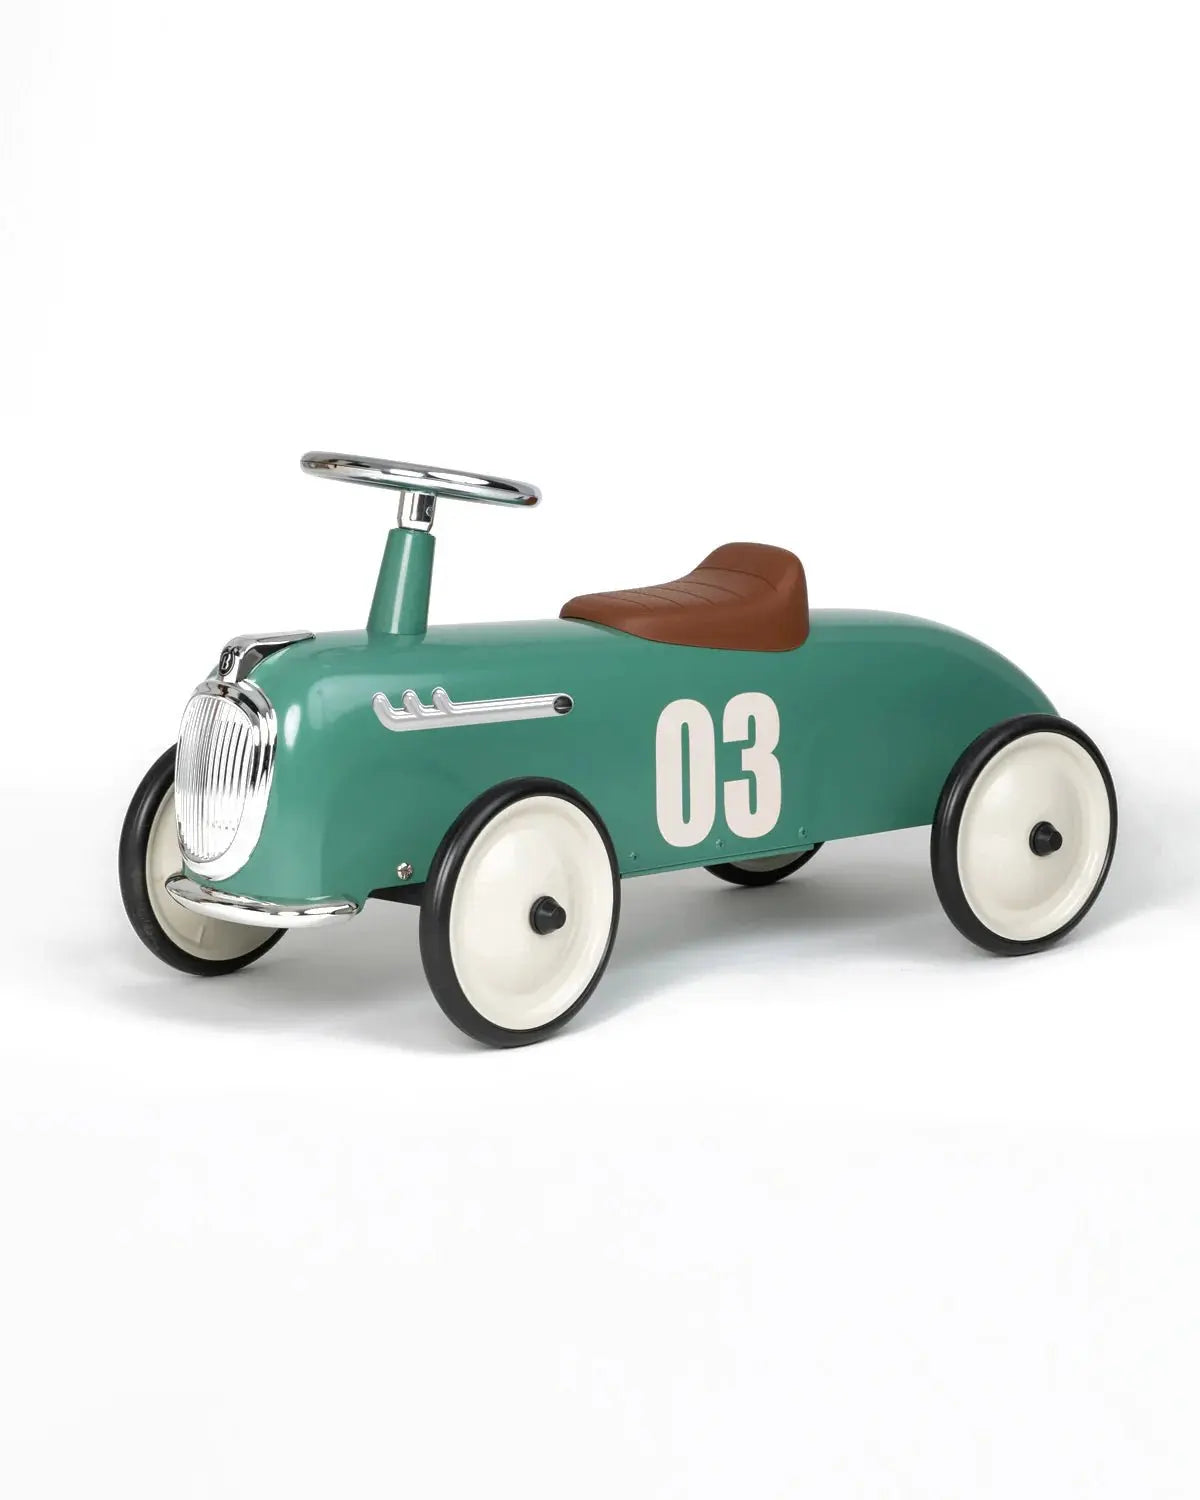 Safe and Fun Ride-On Roadster for Children - Classic Design, Sleek and Aerodynamic  Baghera Tender Green  